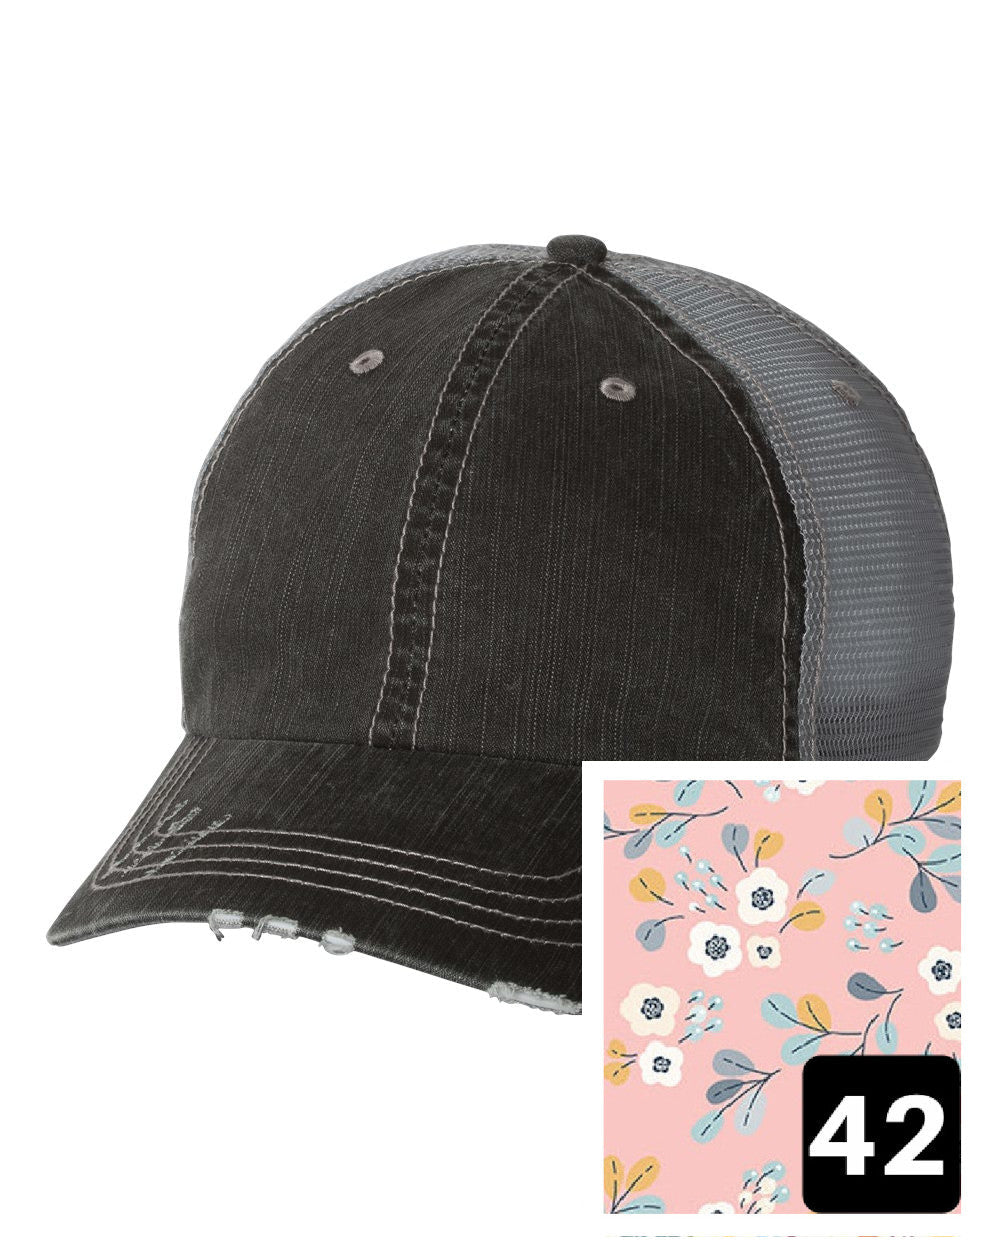 gray distressed trucker hat with light blue and pink mosaic fabric state of New Hampshire